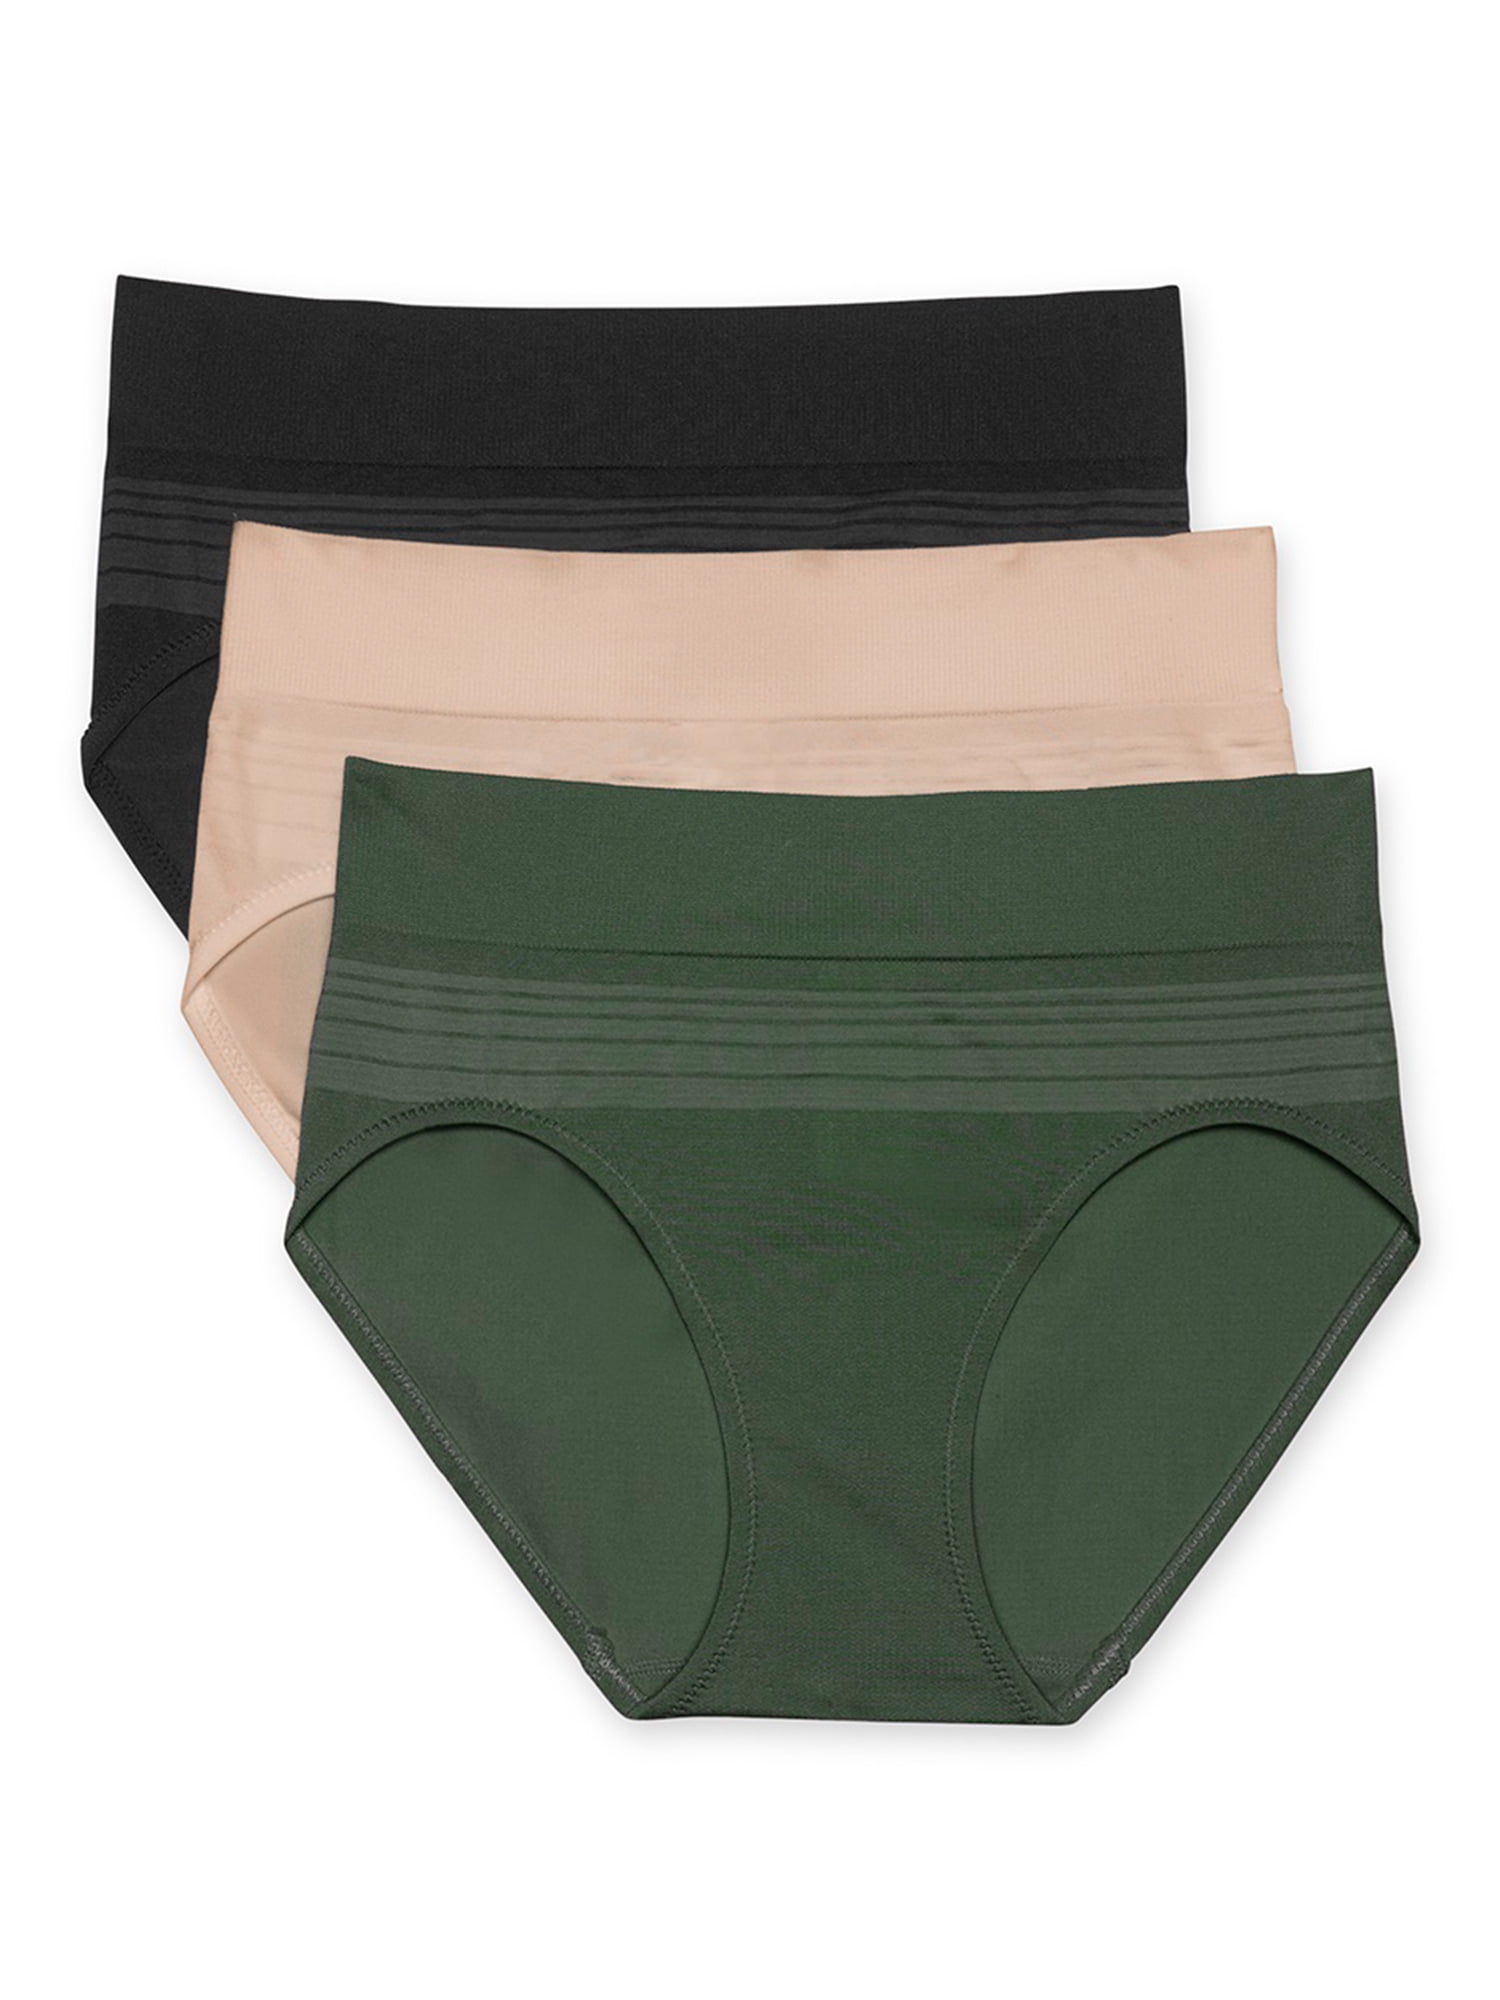 Warners Womens Blissful Benefits Seamless Hipster Panty 3 Pack 